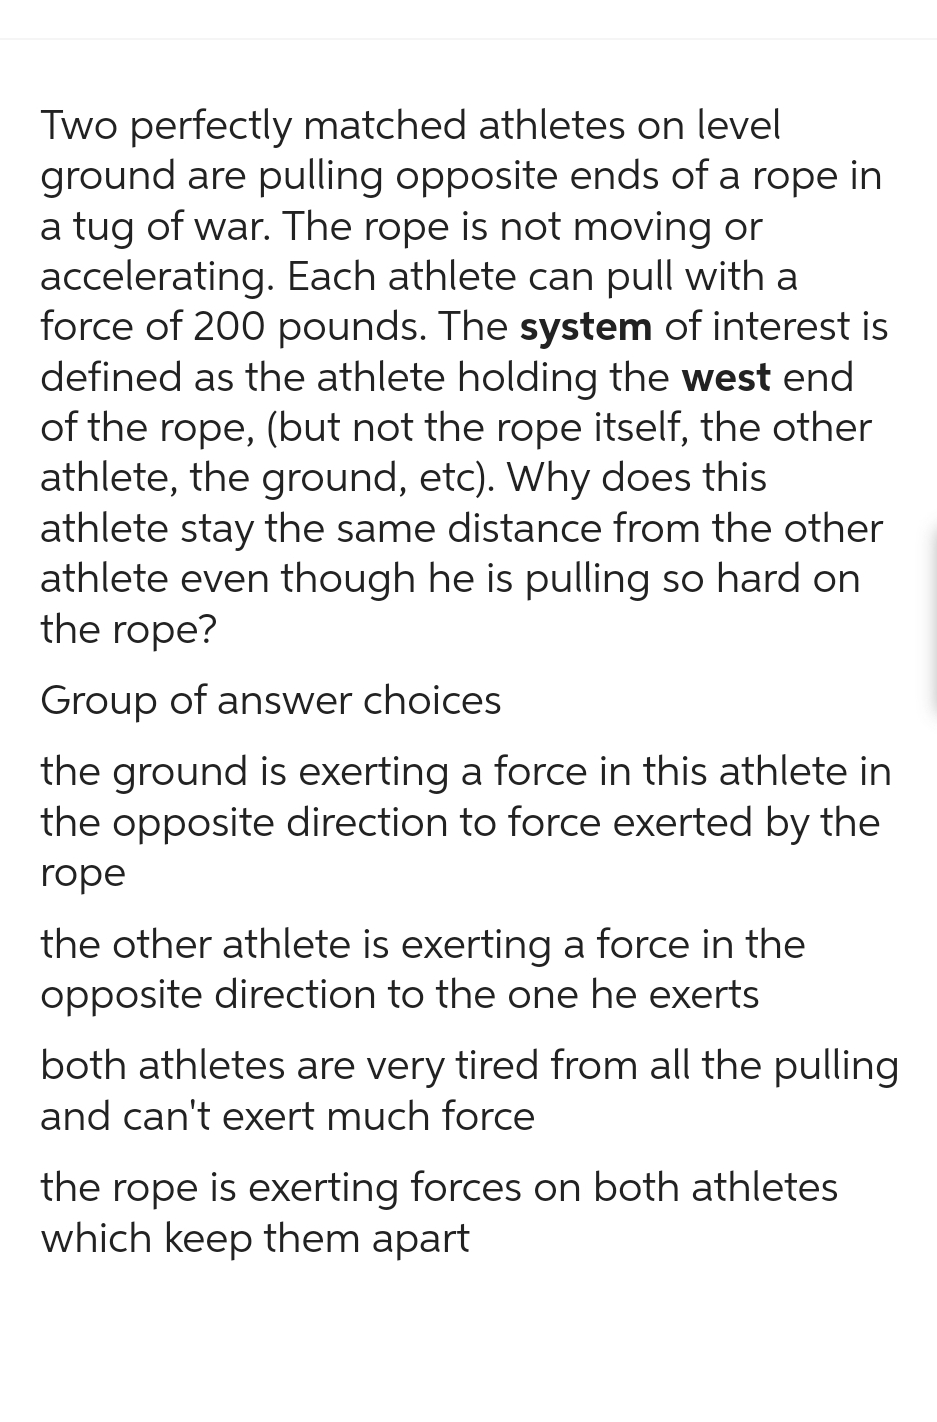 Two perfectly matched athletes on level
ground are pulling opposite ends of a rope in
a tug of war. The rope is not moving or
accelerating. Each athlete can pull with a
force of 200 pounds. The system of interest is
defined as the athlete holding the west end
of the rope, (but not the rope itself, the other
athlete, the ground, etc). Why does this
athlete stay the same distance from the other
athlete even though he is pulling so hard on
the rope?
Group of answer choices
the ground is exerting a force in this athlete in
the opposite direction to force exerted by the
rope
the other athlete is exerting a force in the
opposite direction to the one he exerts
both athletes are very tired from all the pulling
and can't exert much force
the rope is exerting forces on both athletes
which keep them apart